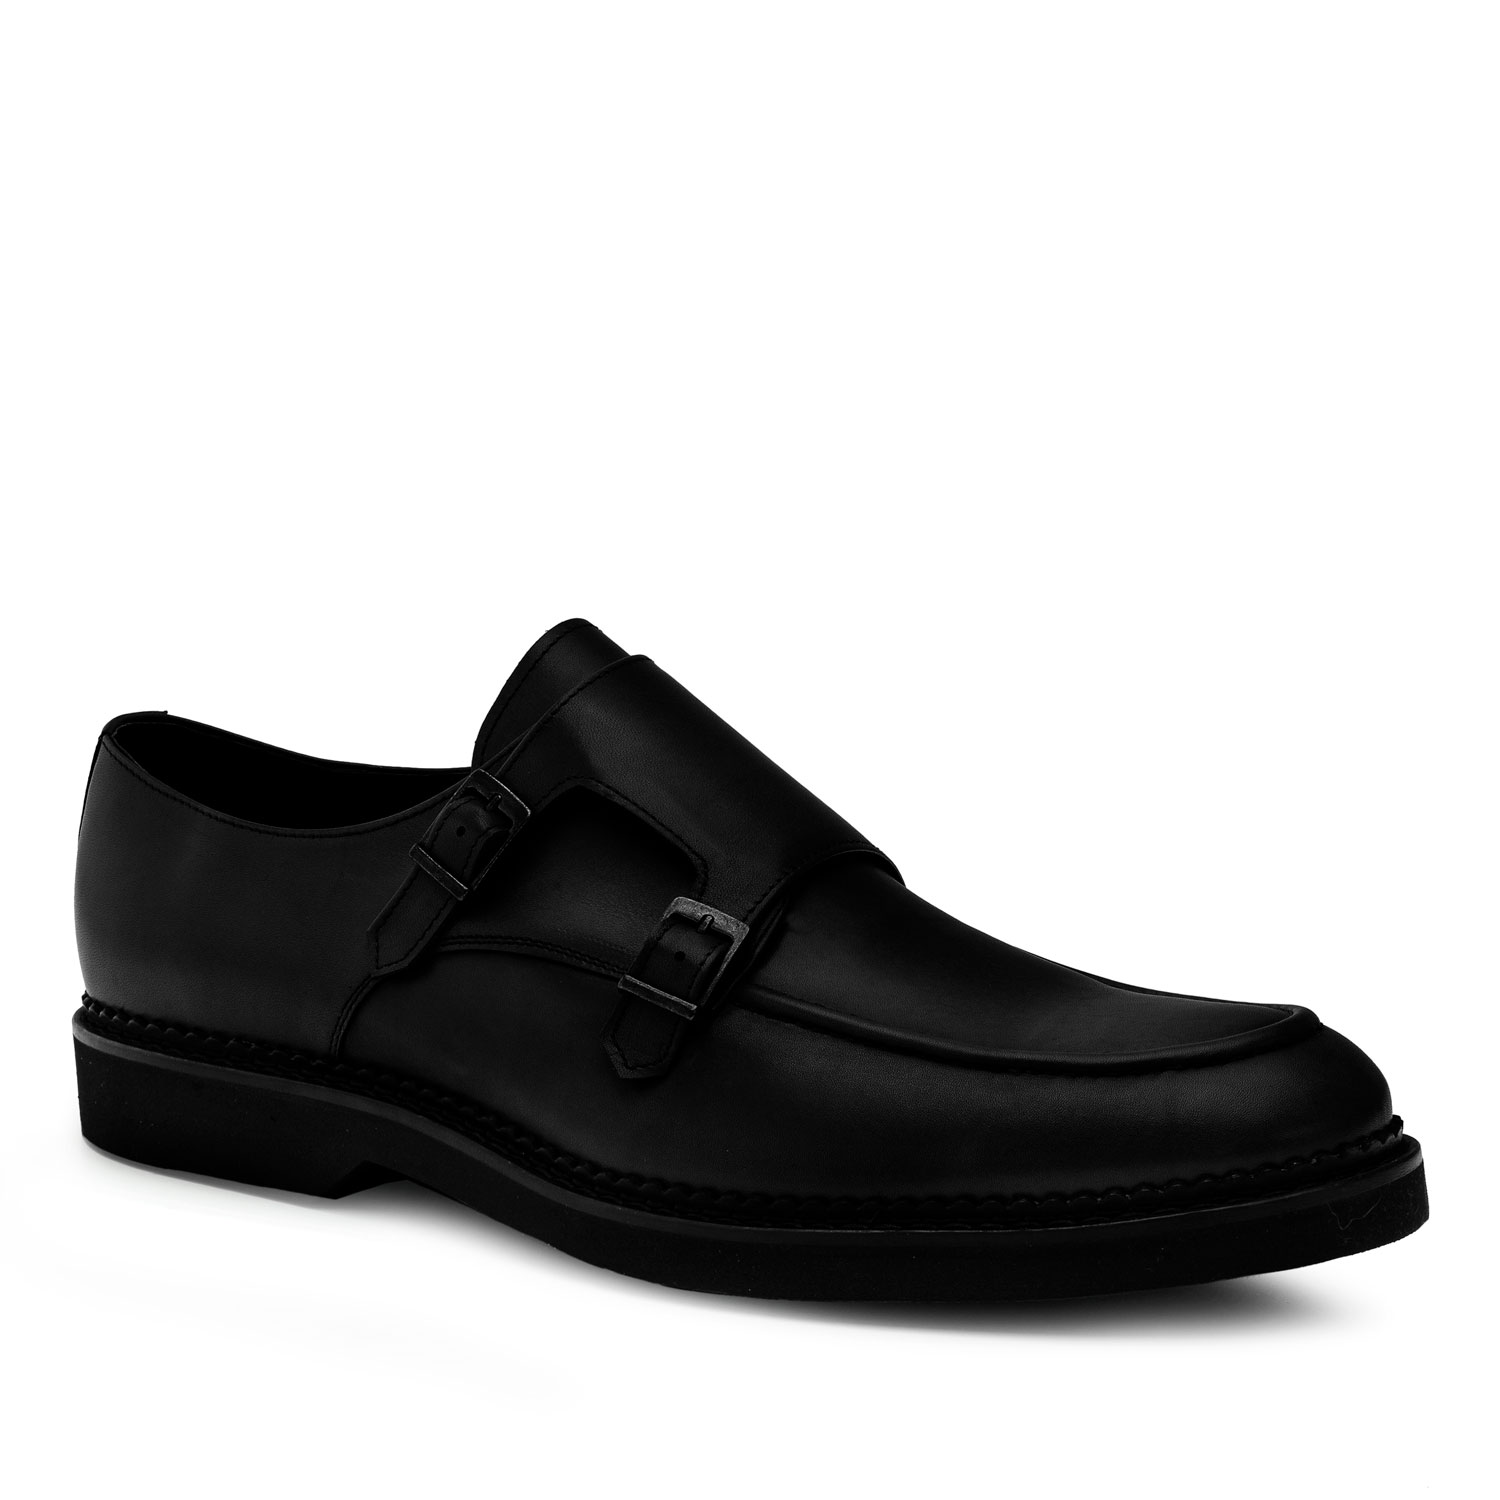 Monkstrap Shoes in Black Leather 